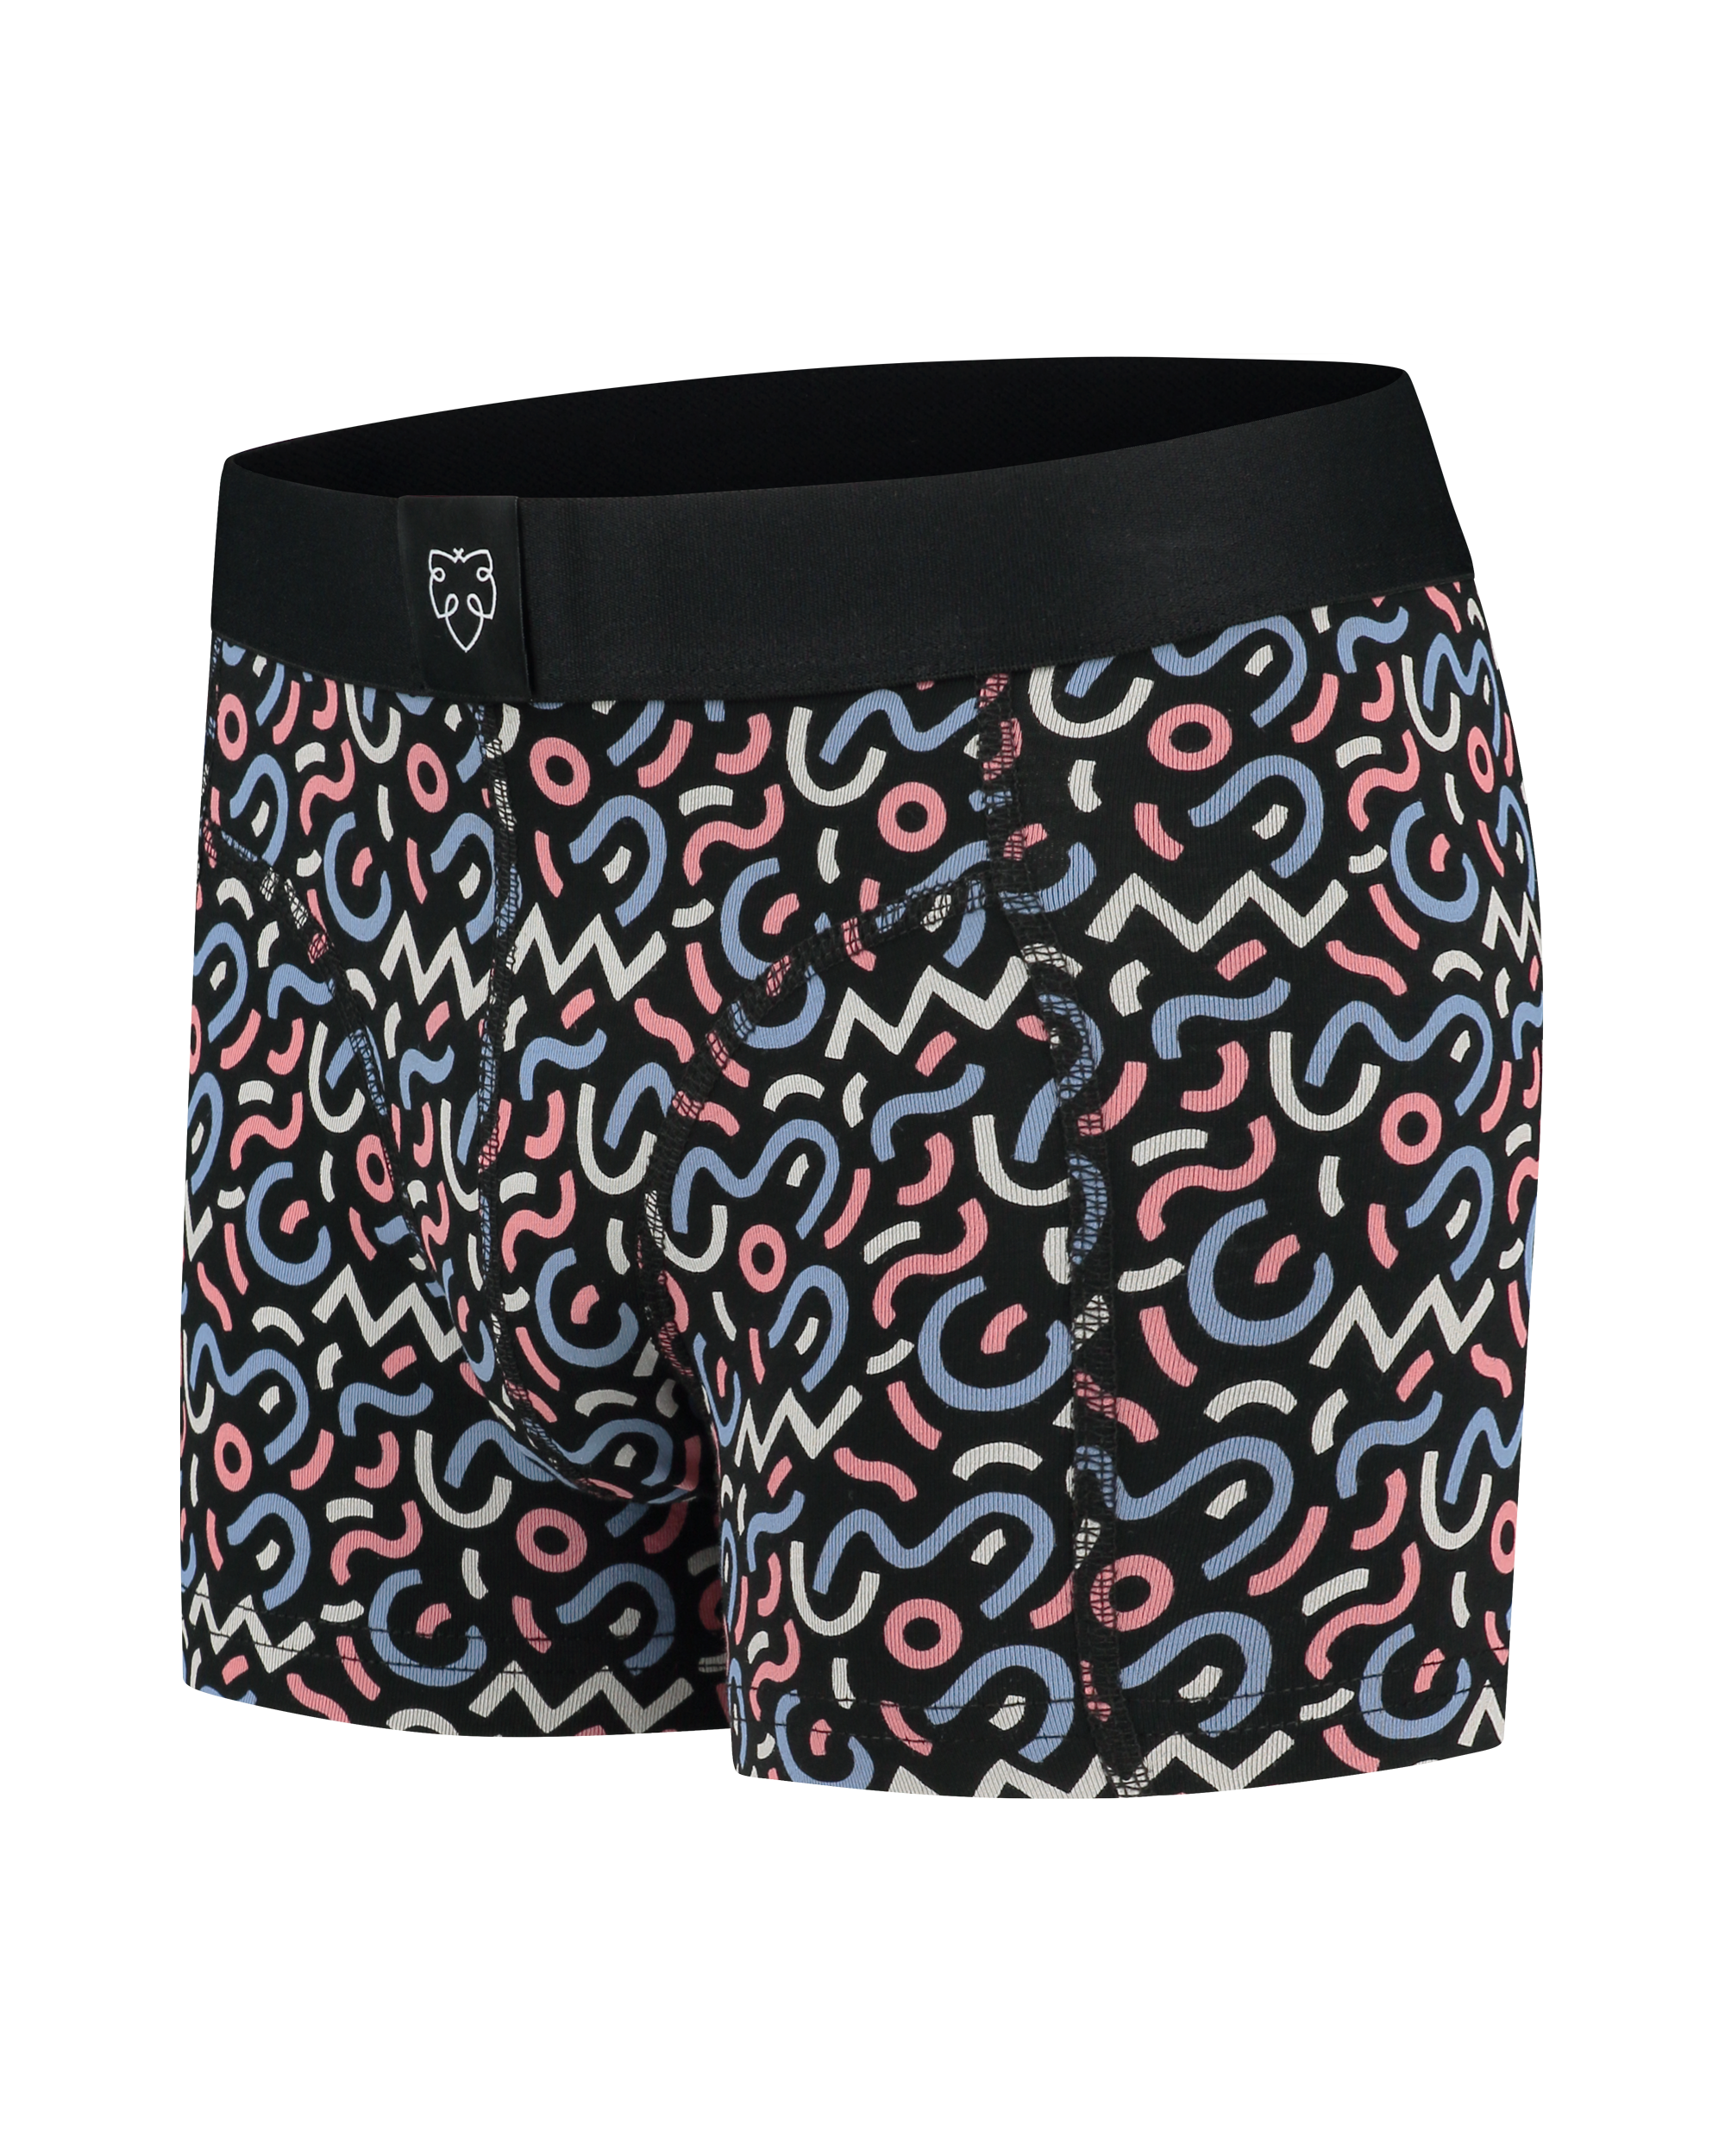 A-dam Boys Boxer brief with Memphis print from GOTS organic cotton